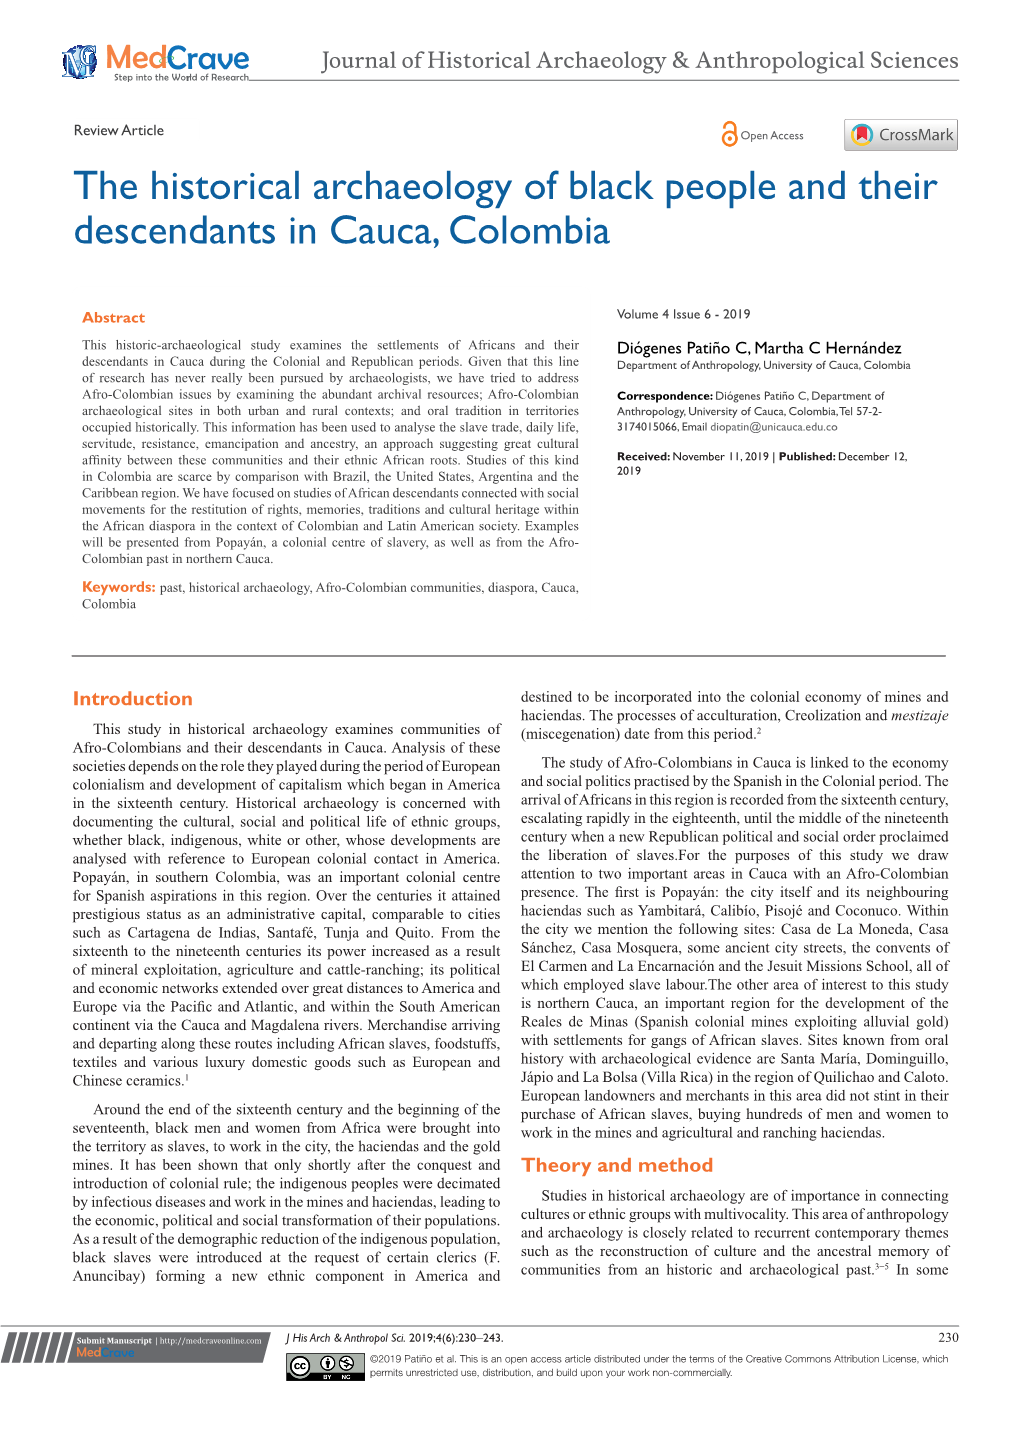 The Historical Archaeology of Black People and Their Descendants in Cauca, Colombia